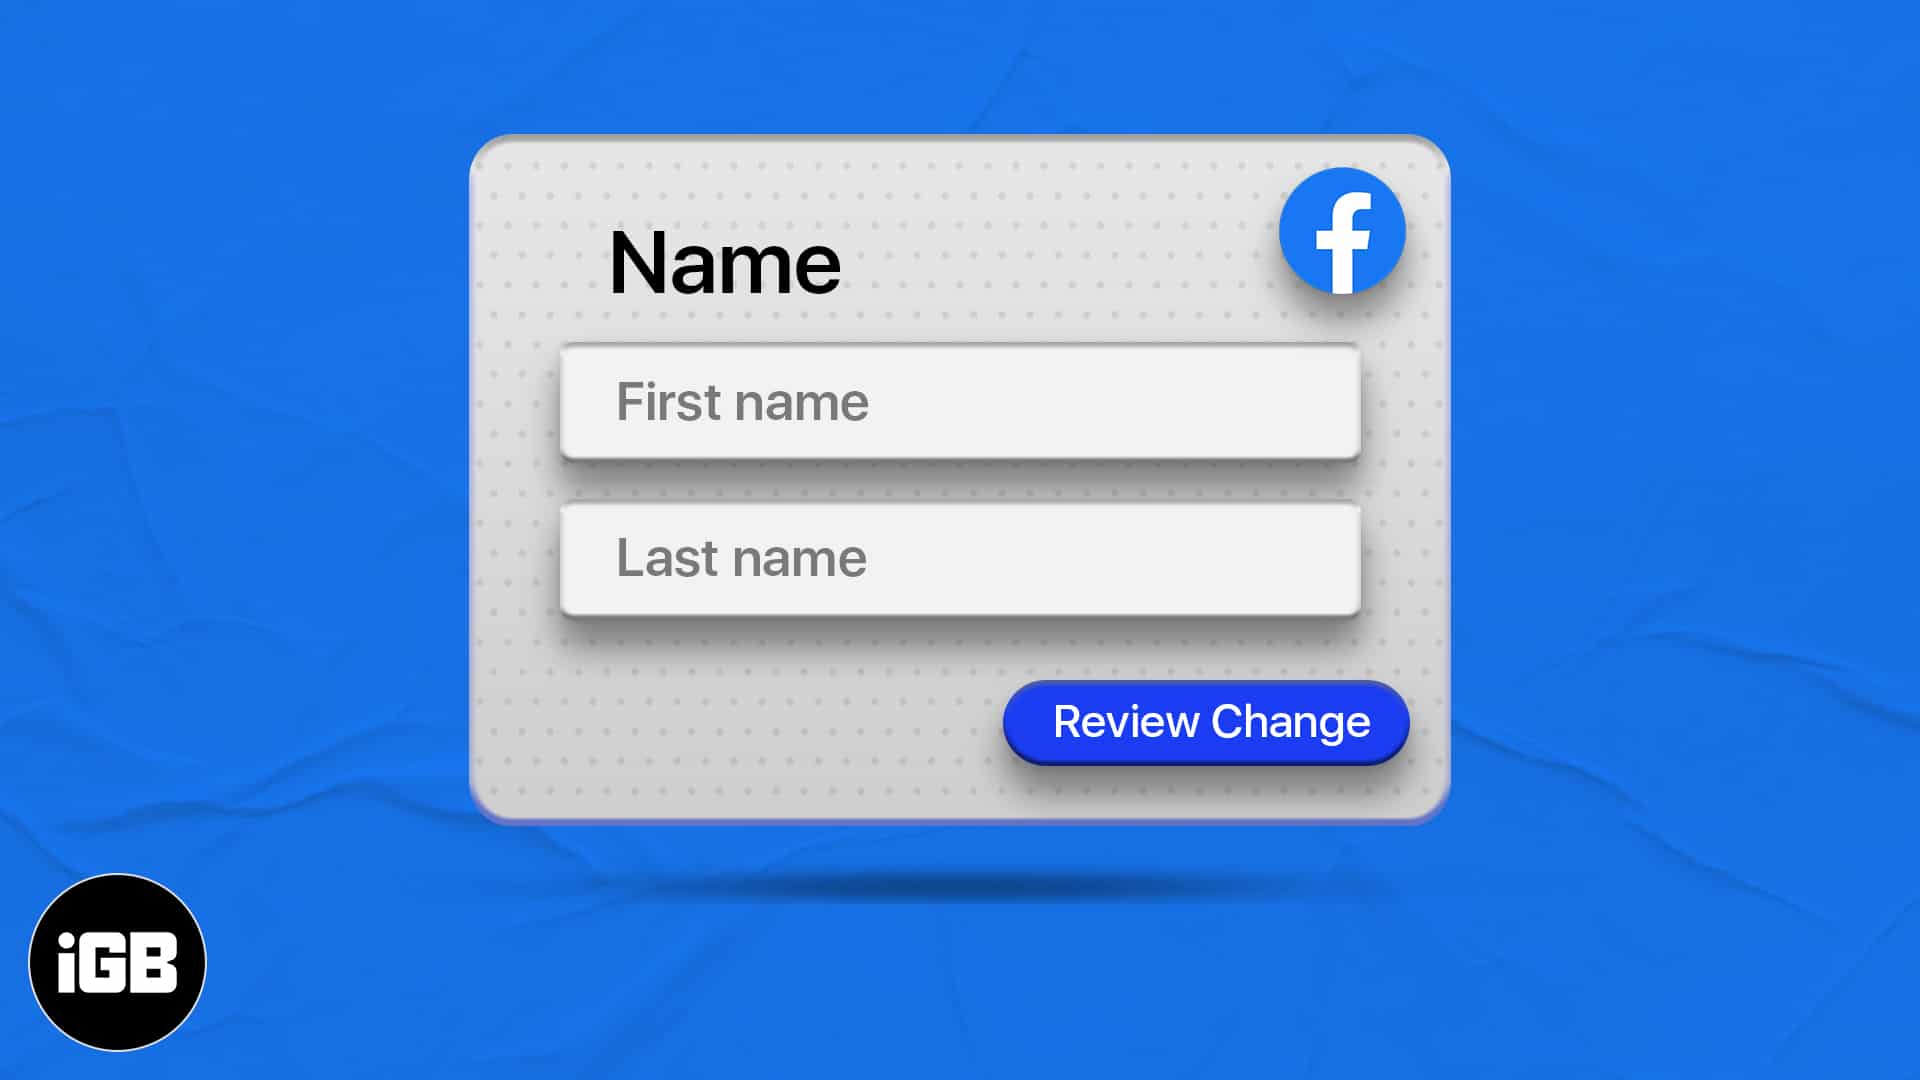 How to change your name on Facebook on iPhone